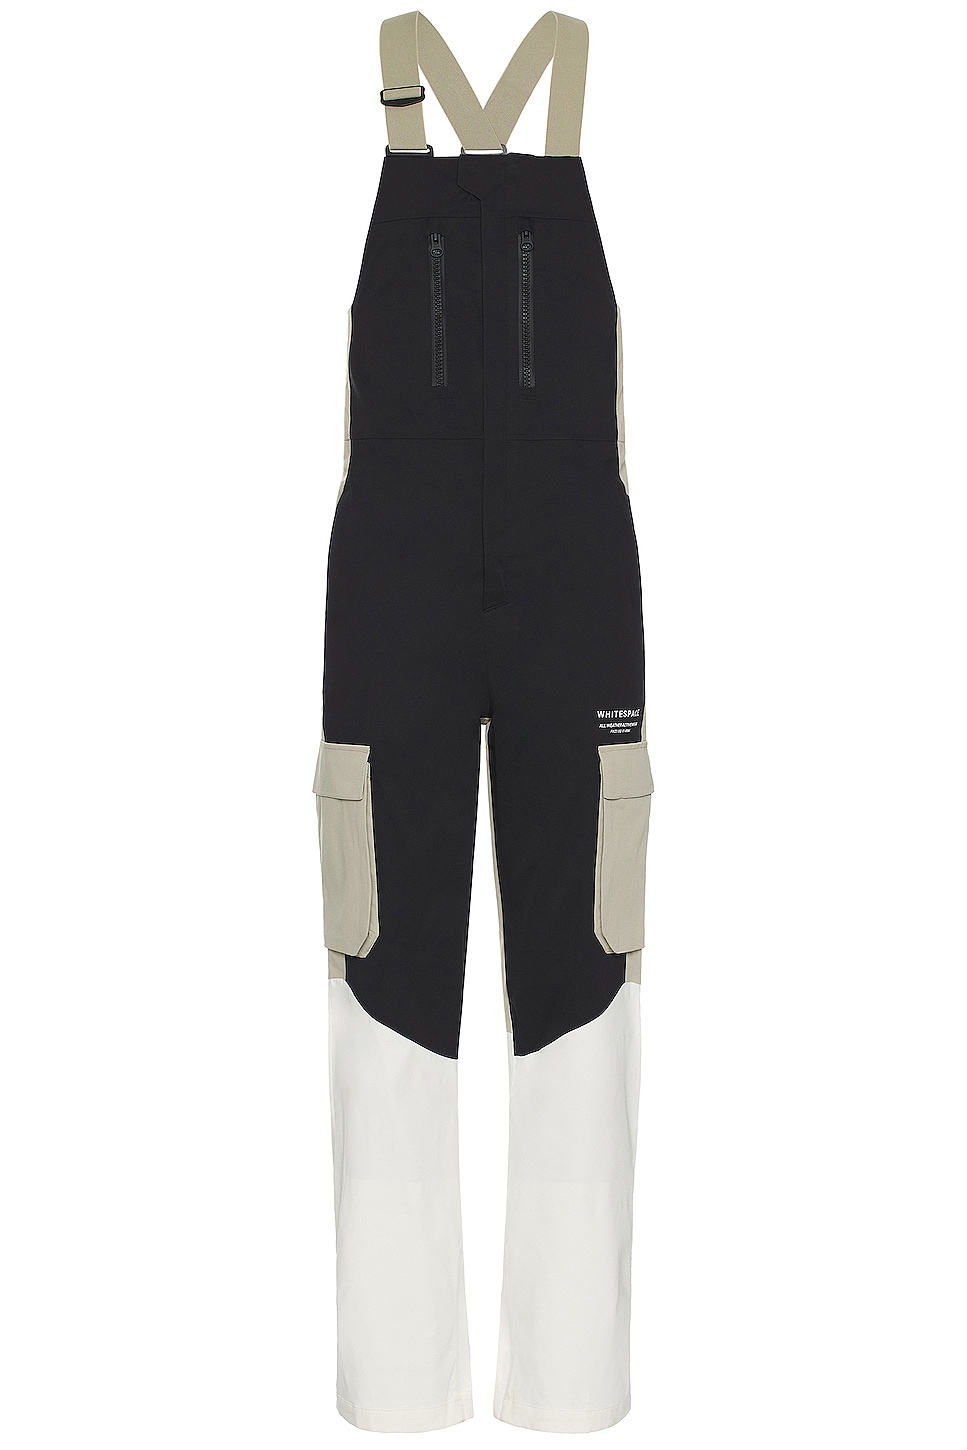 Whitespace 2l Insulated Cargo Bib Pant in Sage